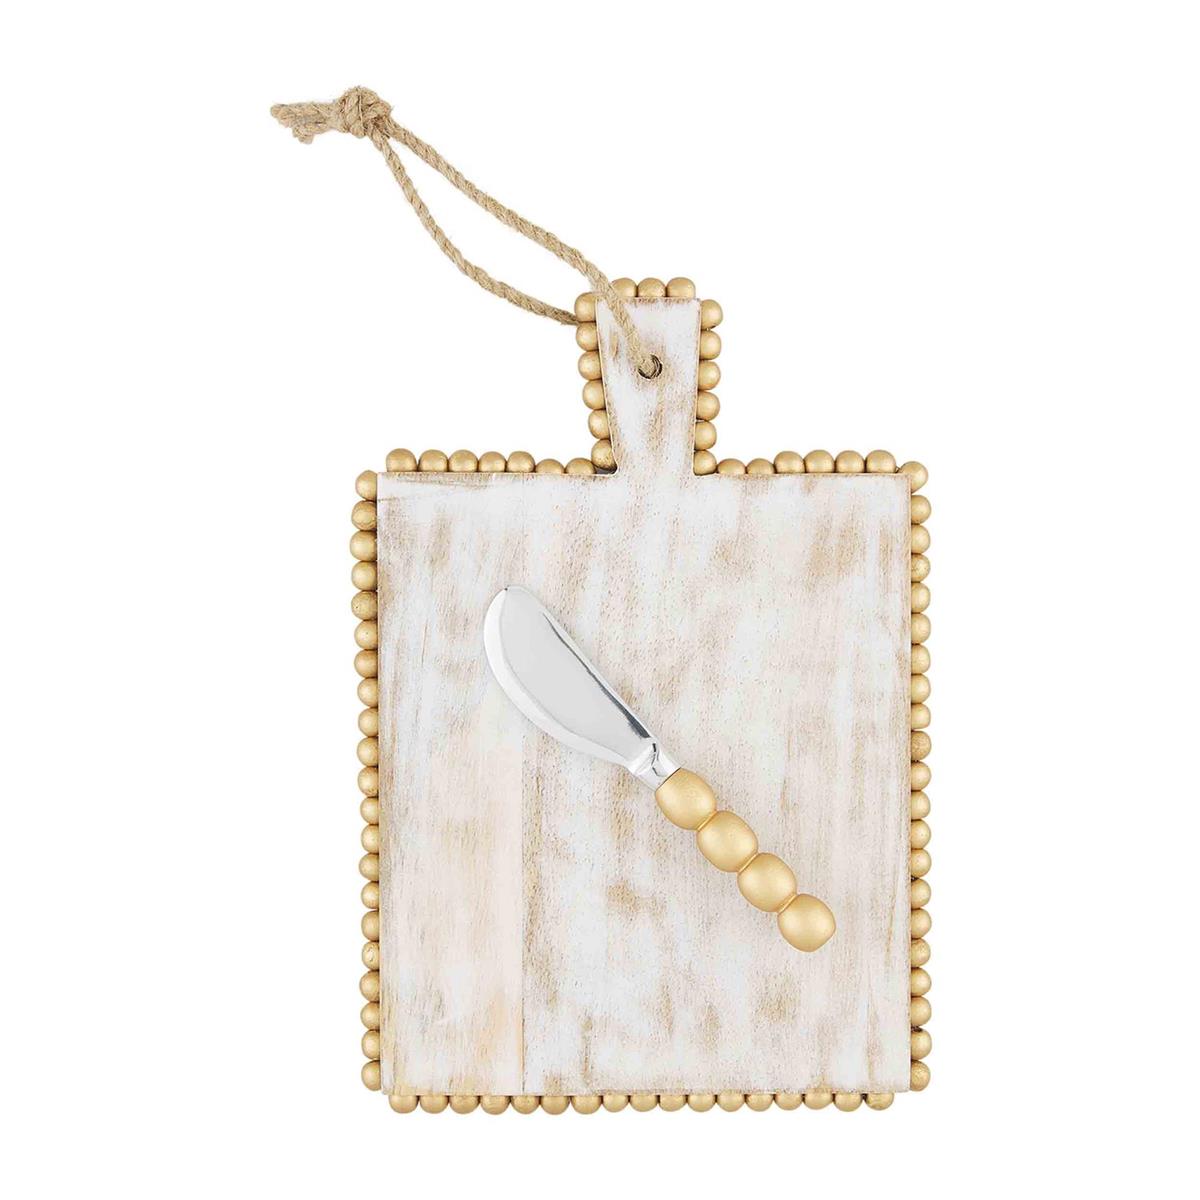 square with gold bead board and spreader set displayed against a white background